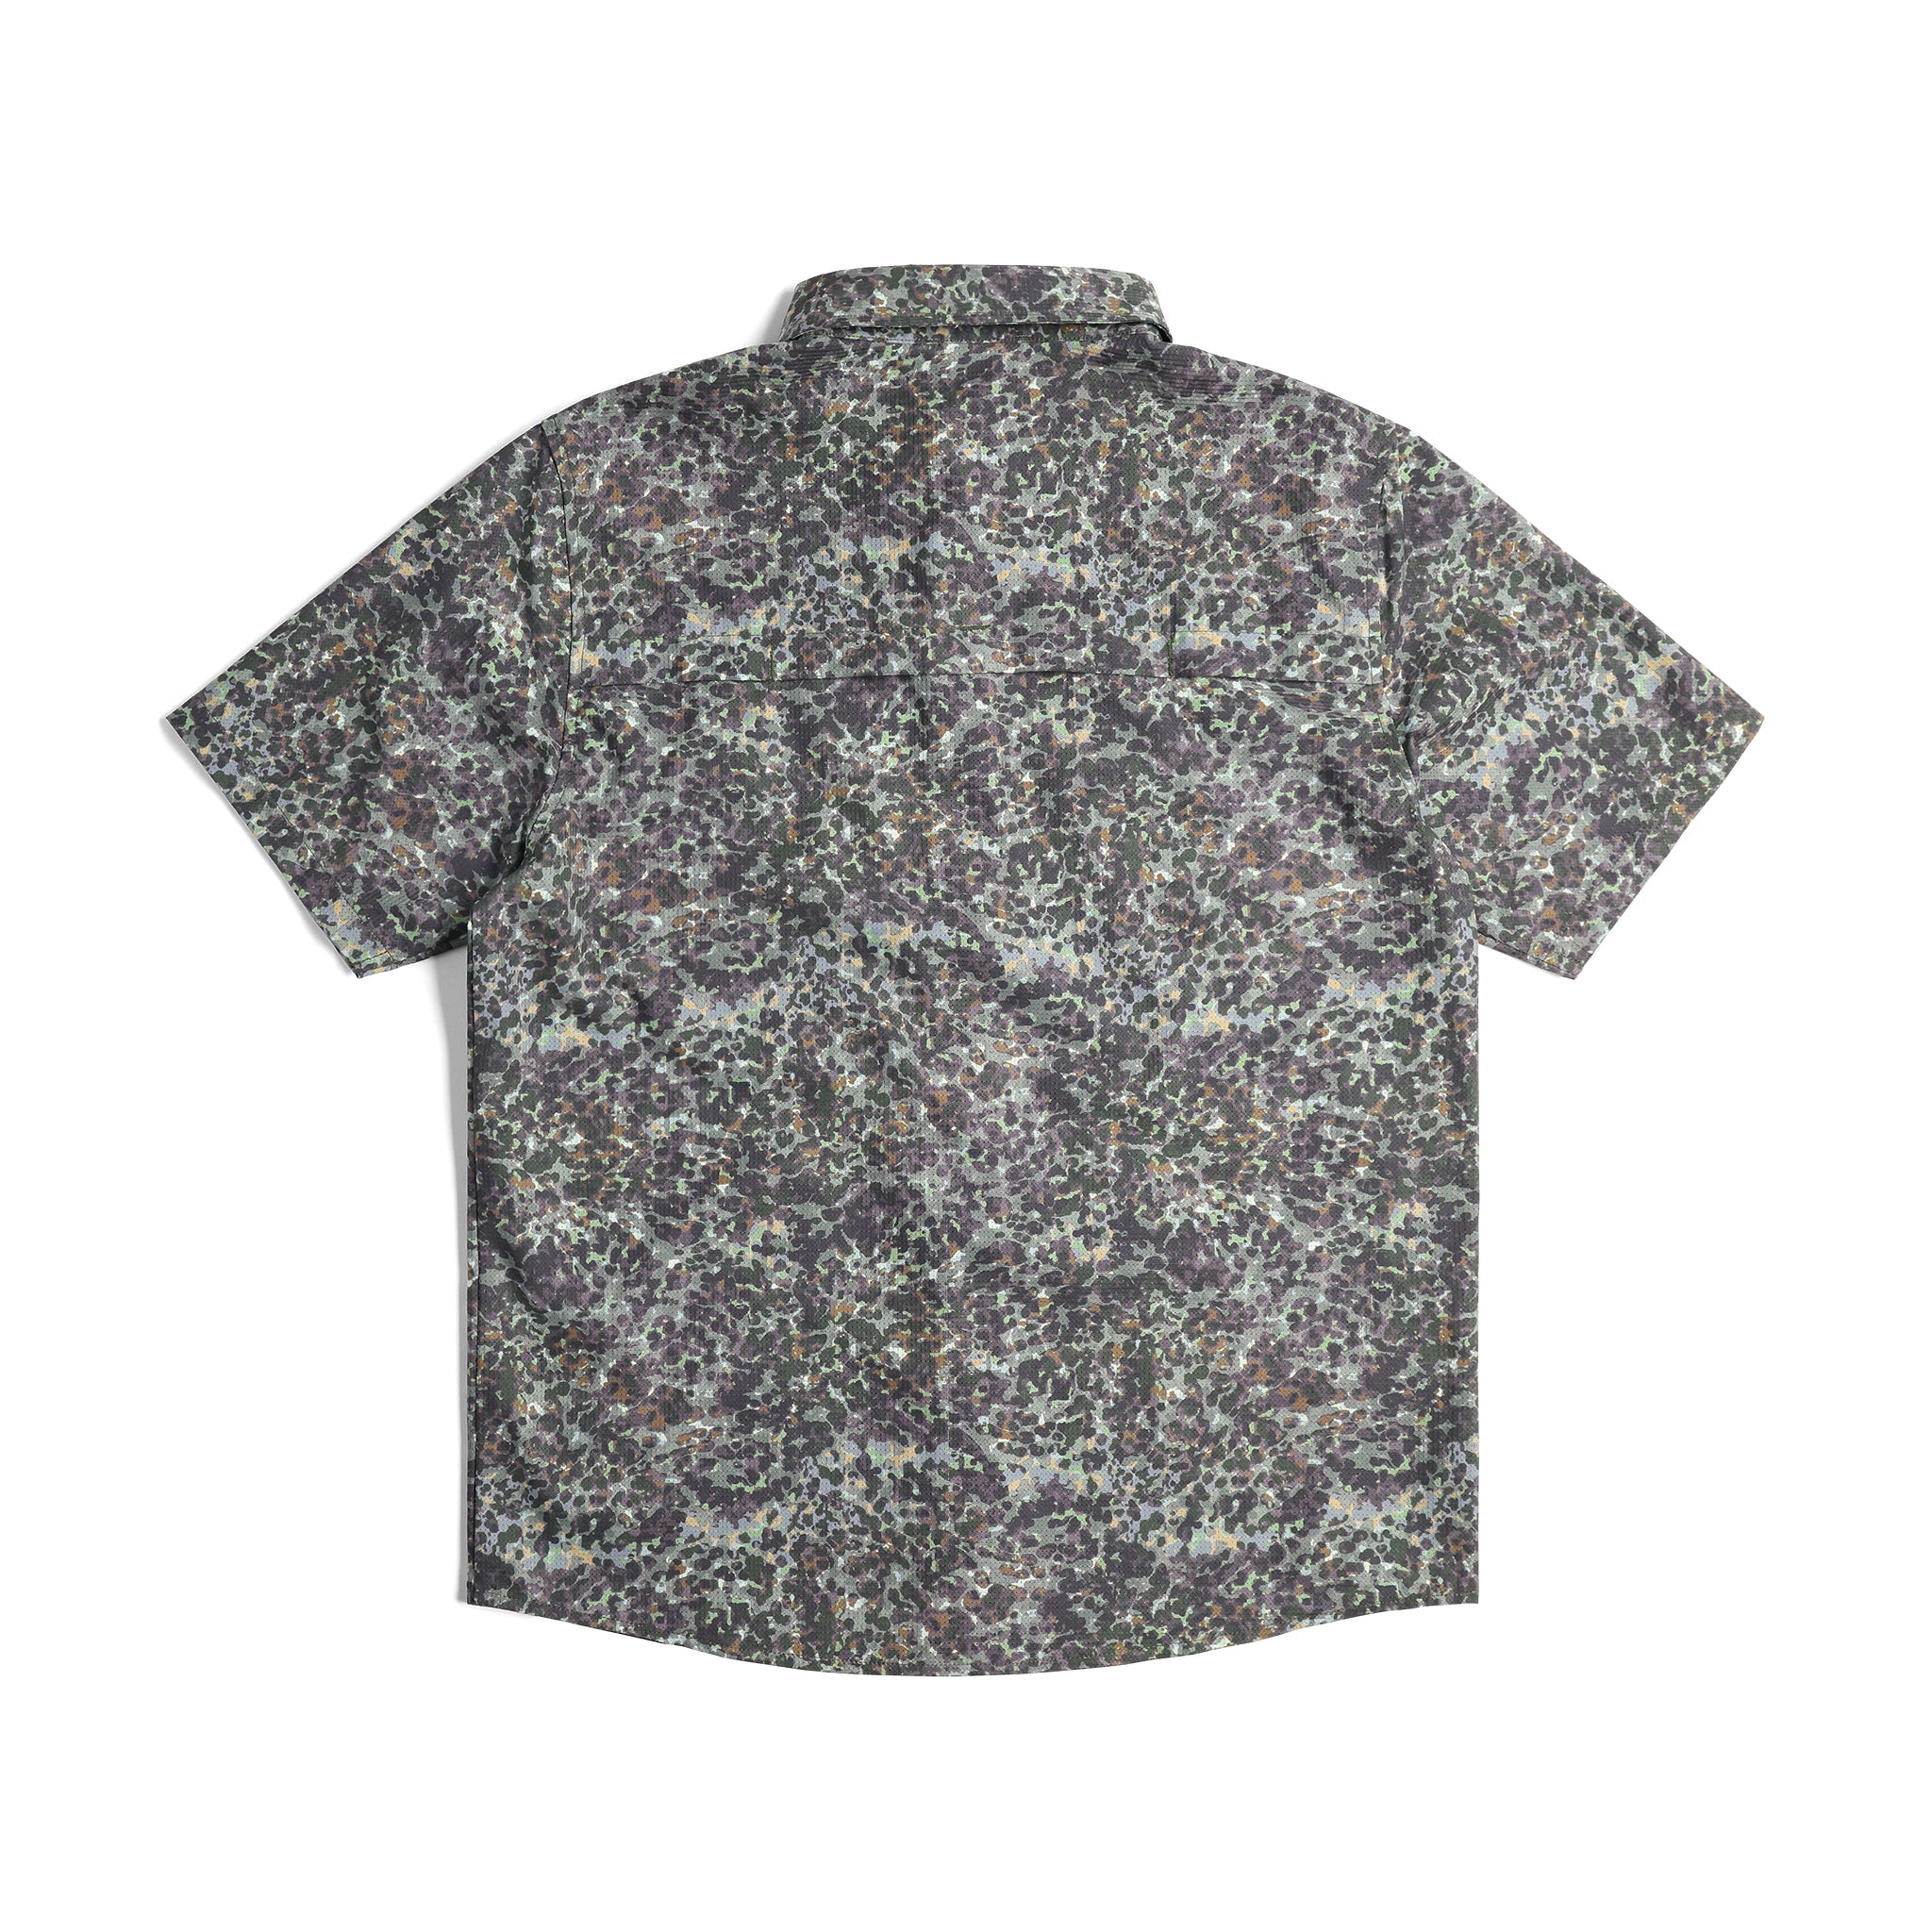 Back View of Topo Designs Retro River Shirt Ss - Men's in "Olive Meteor"